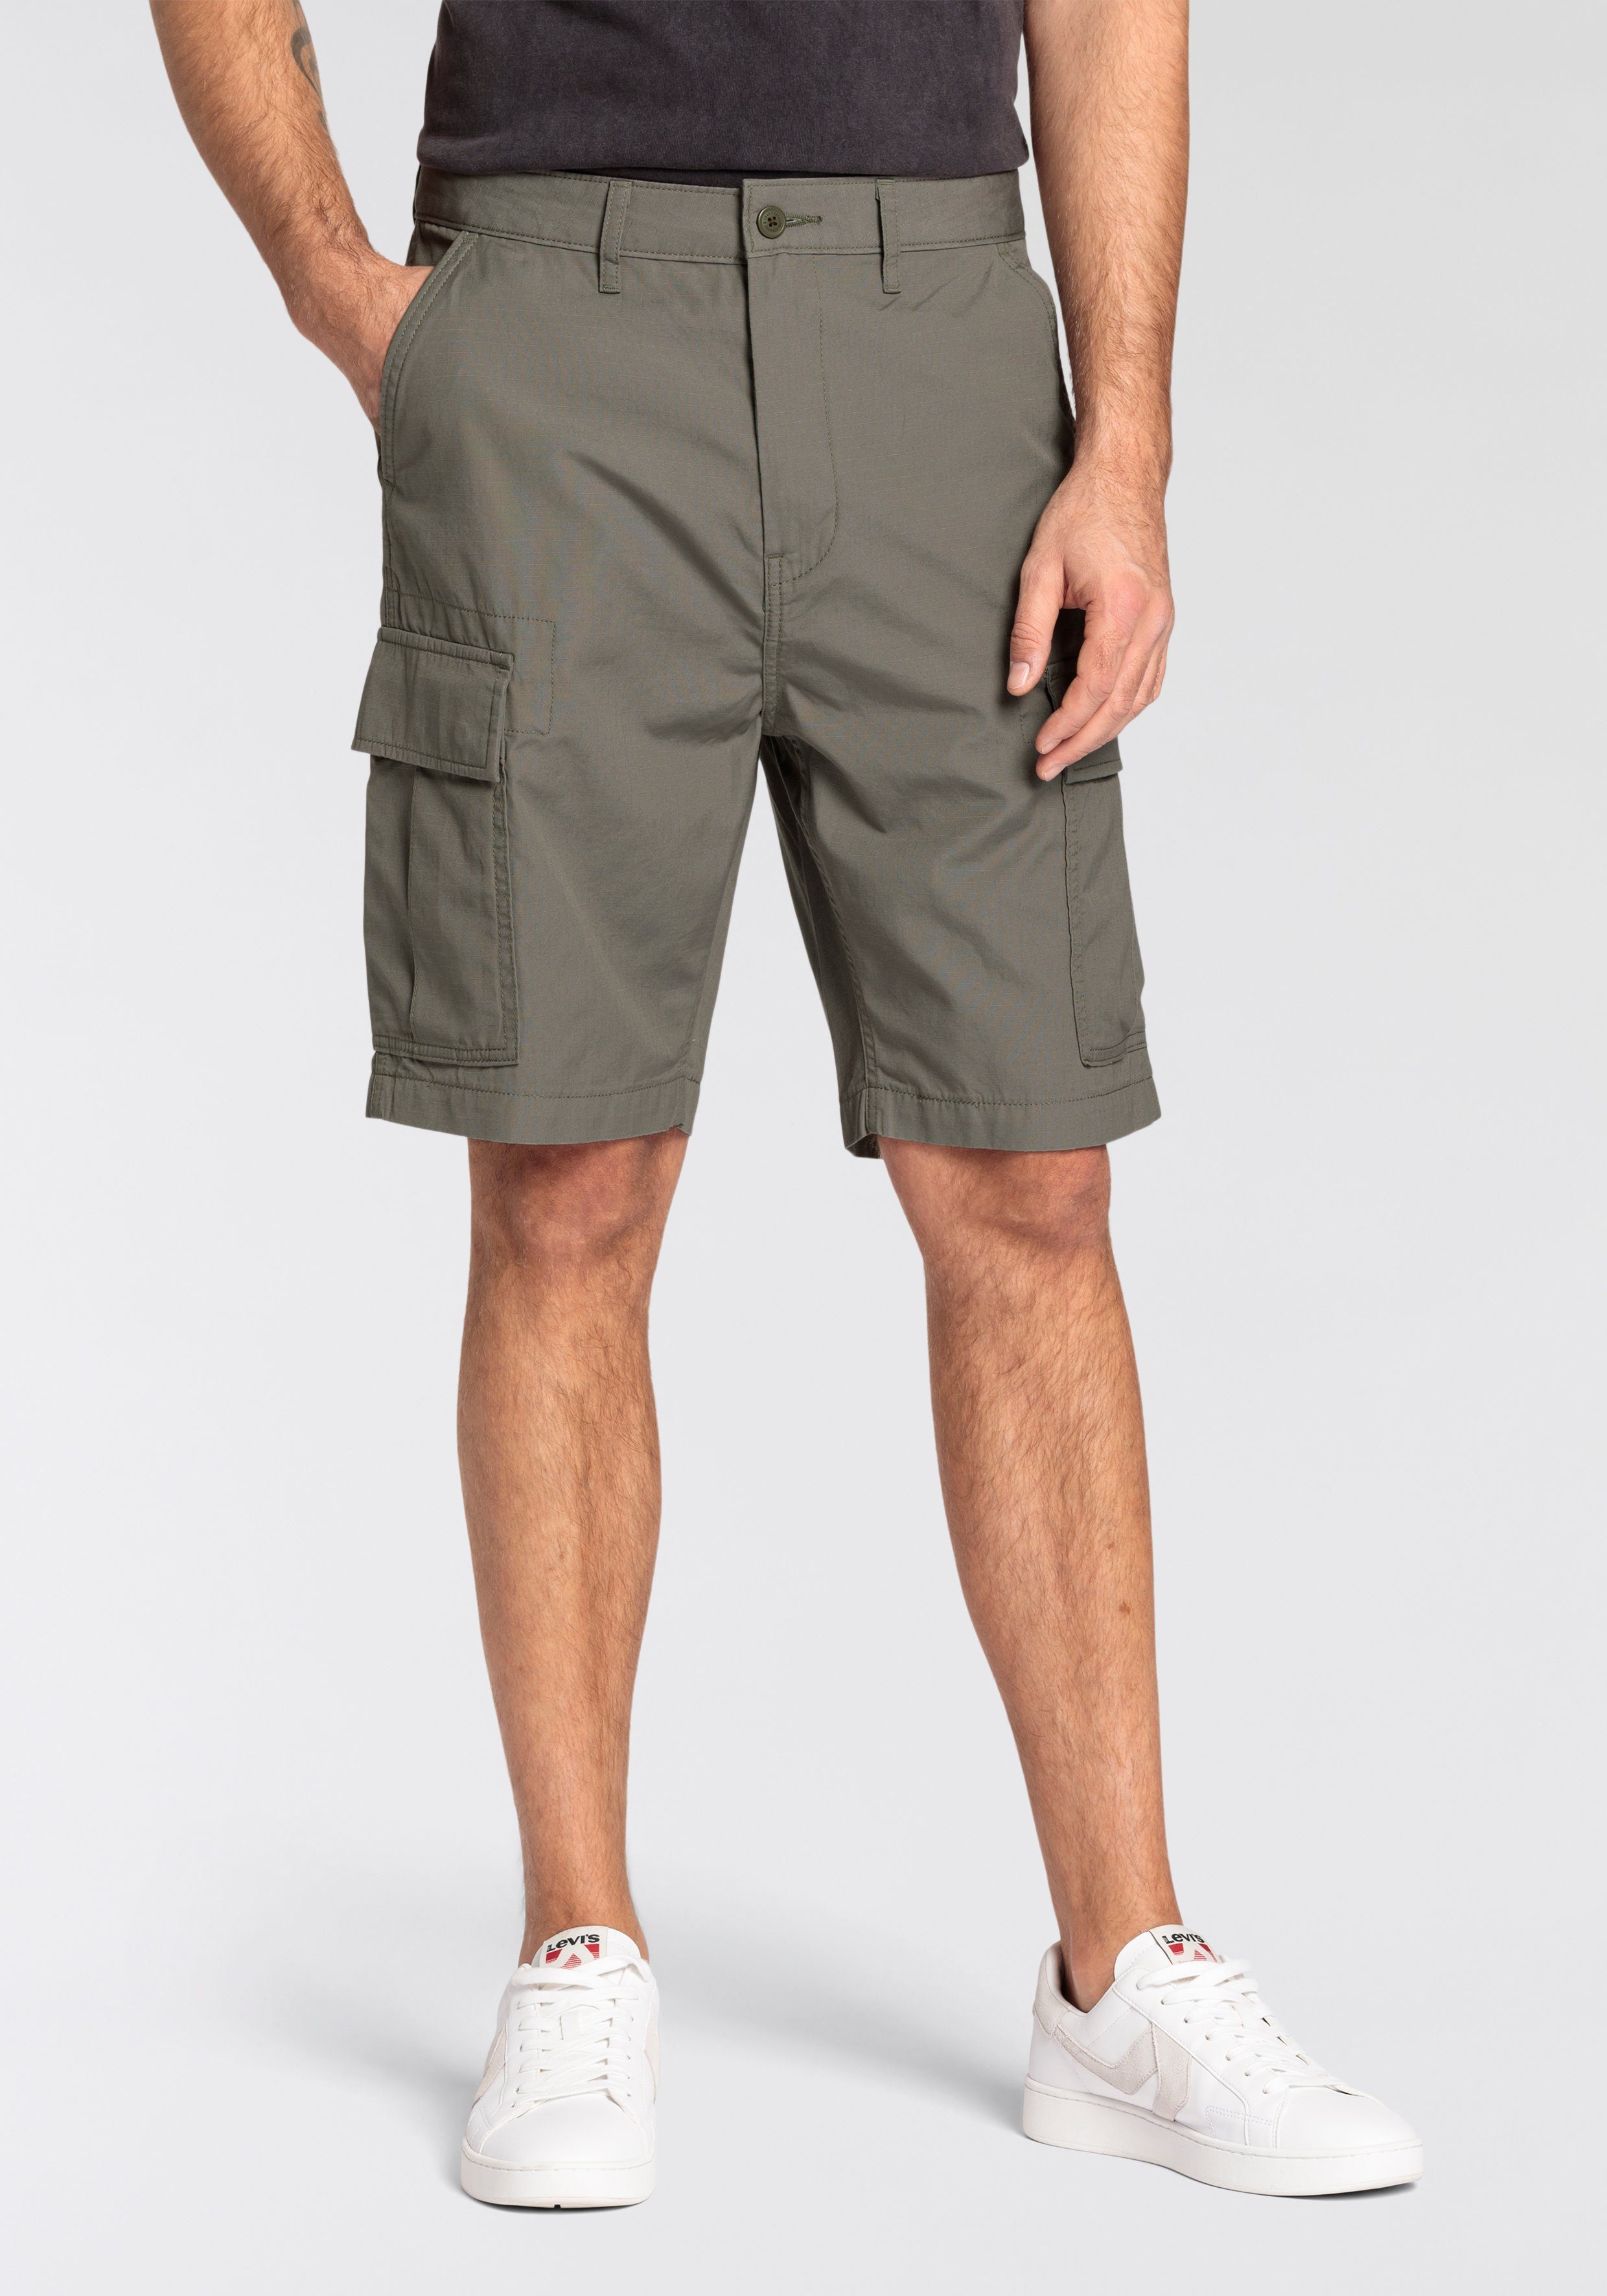 Levi's Cargo Carrier Shorts in Smokey Olive Green Heren